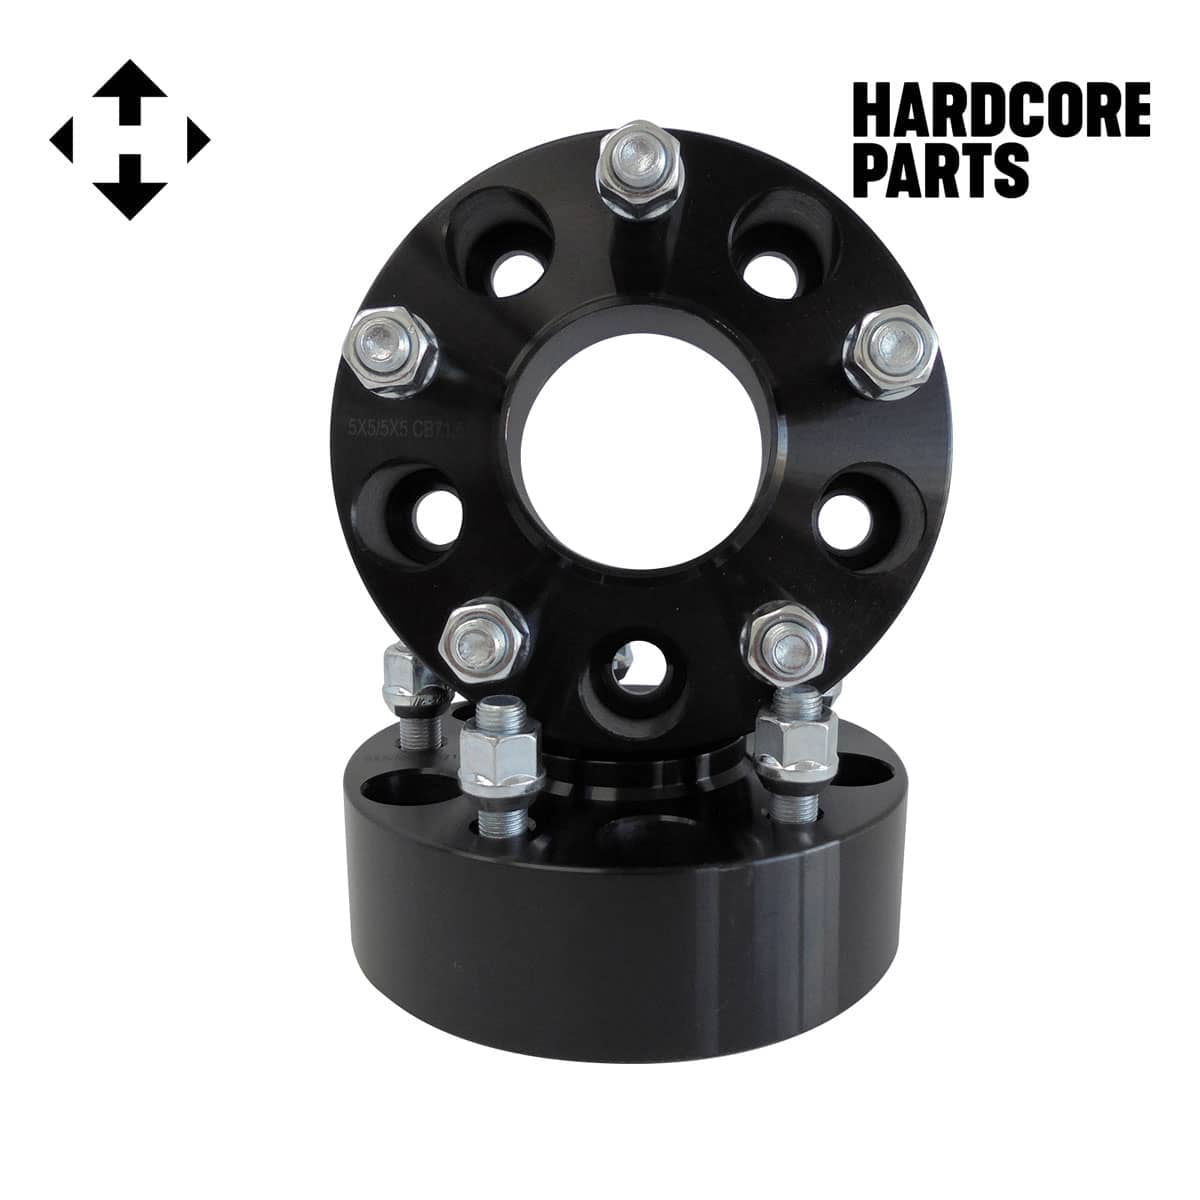 4 1.5" 5x5 Hubcentric Black Wheel Spacers 1/2" x20 For Jeep Wrangler JK